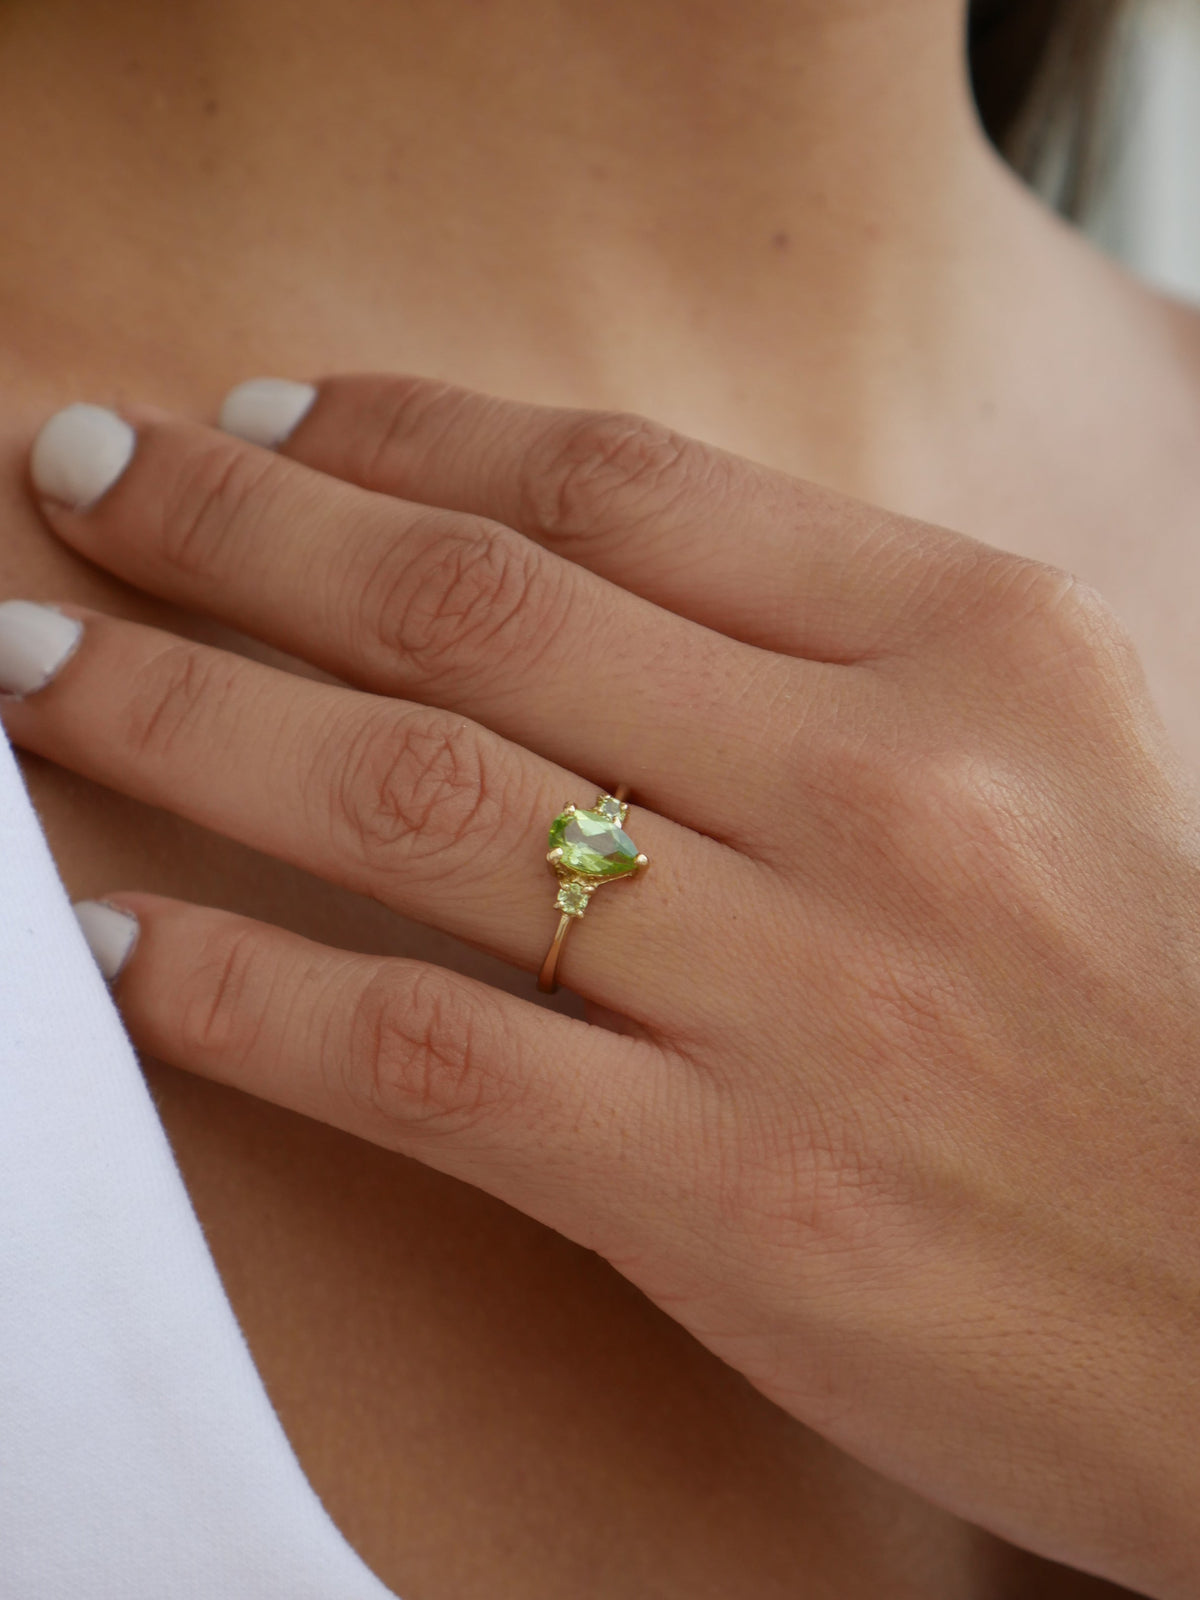 rings, gold ring, peridot rings, gold peridot rings, gemstone rings, dainty gemstone rings, dainty birthstone rings, august birthstone jewelry, 925 rings, gold plated jewelry, fashion jewelry, accessories, statement rings , dainty rings, trending on titkok, gift ideas, birthday gifts, anniversary, graduation gifts, fine jewelry, designer jewelry, green crystal jewelry, tiny rings, popular rings, emerald rings, pear shape rings, gold plated, gold vermeil peridot rings